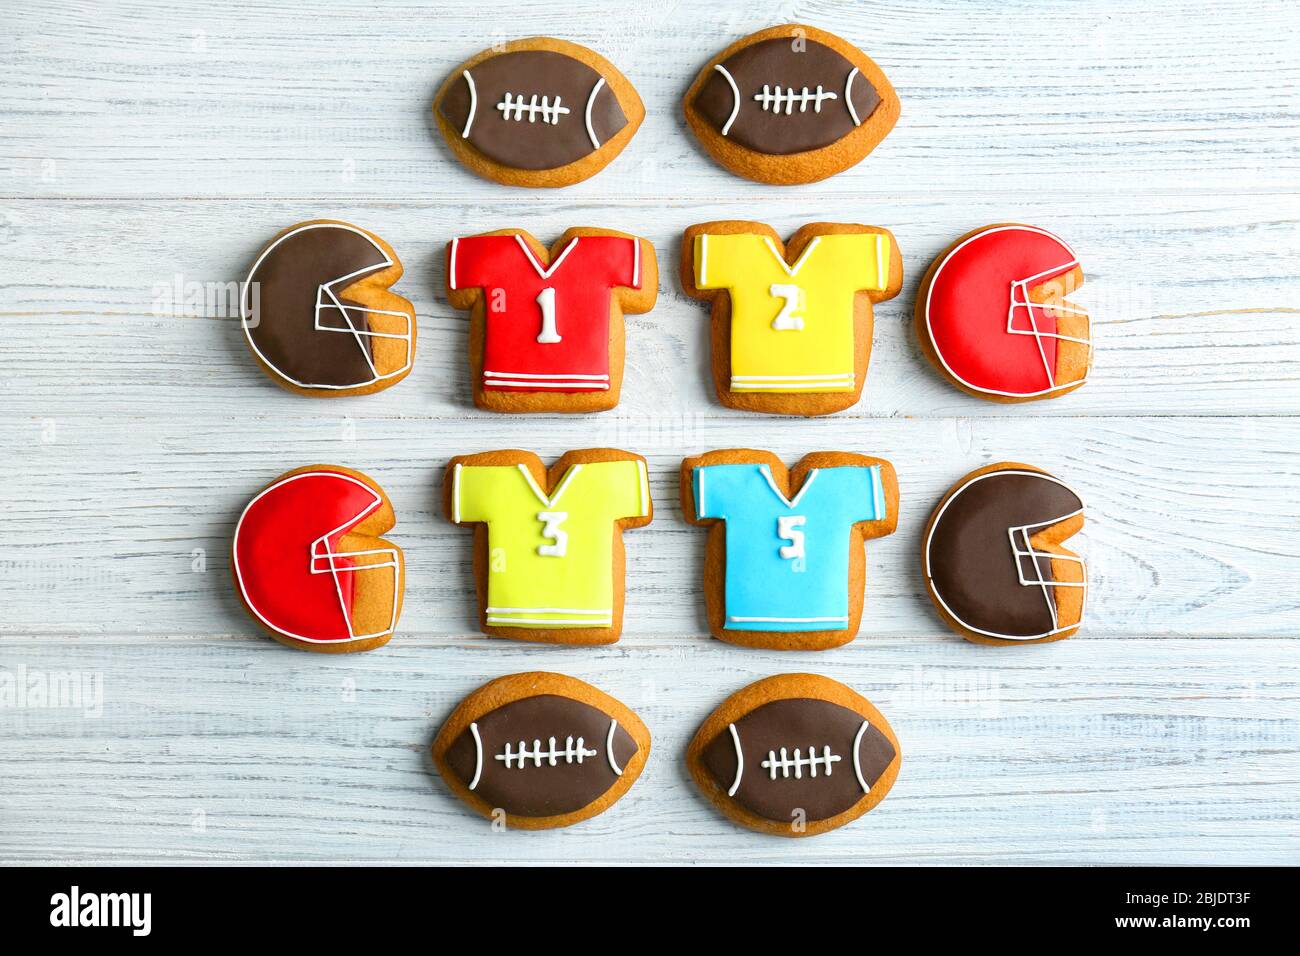 Delicious gingerbread cookies decorated with football signs on white wooden background Stock Photo